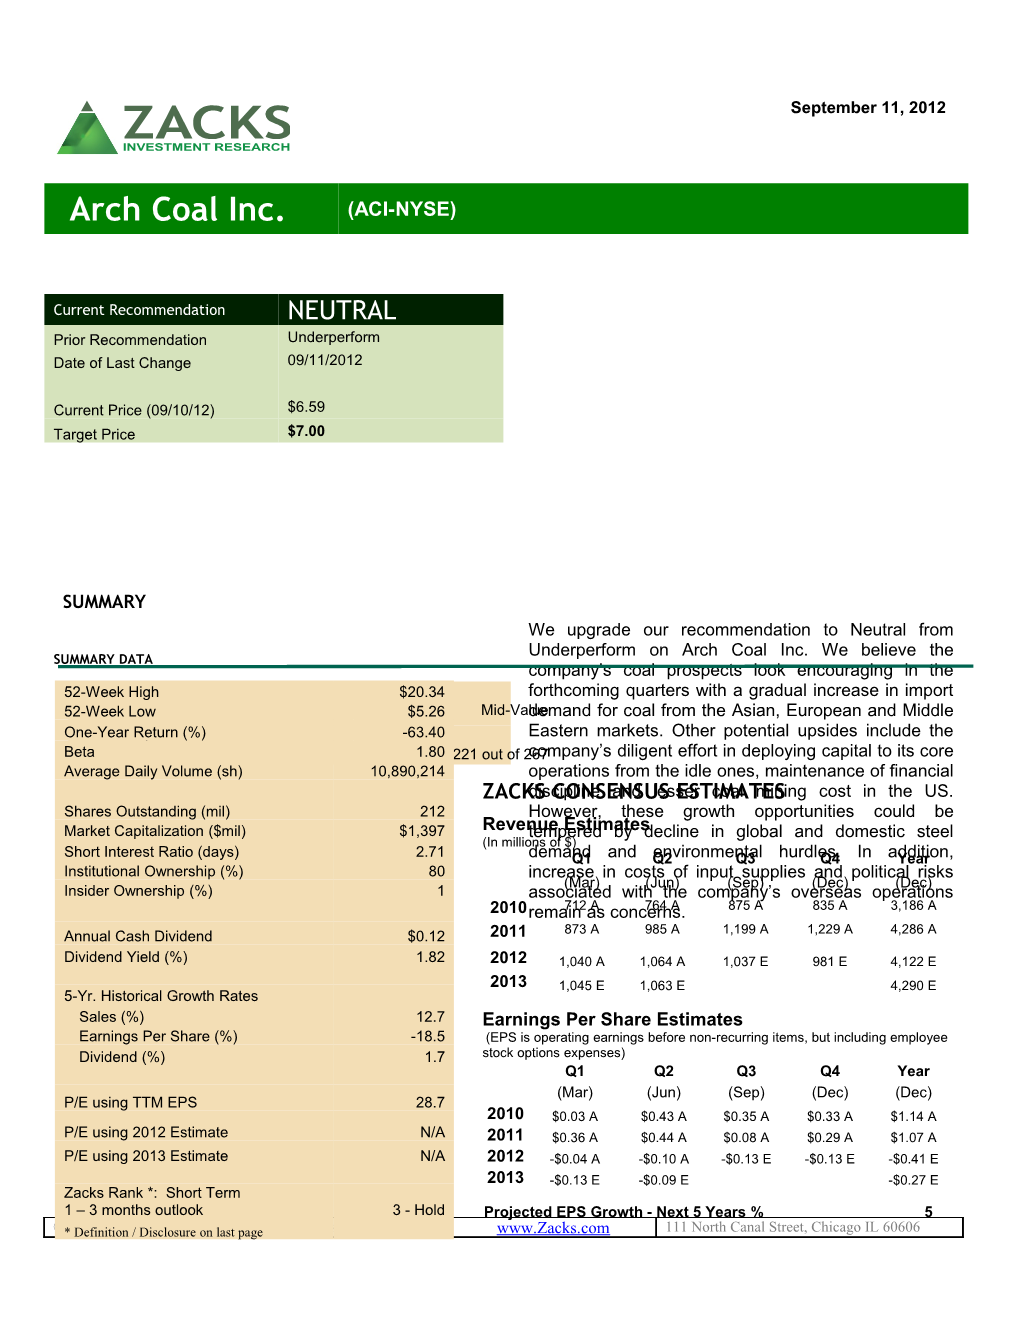 St. Louis, Missouri-Based Arch Coal Inc. (ACI) Is One of the Largest Coal Producers In